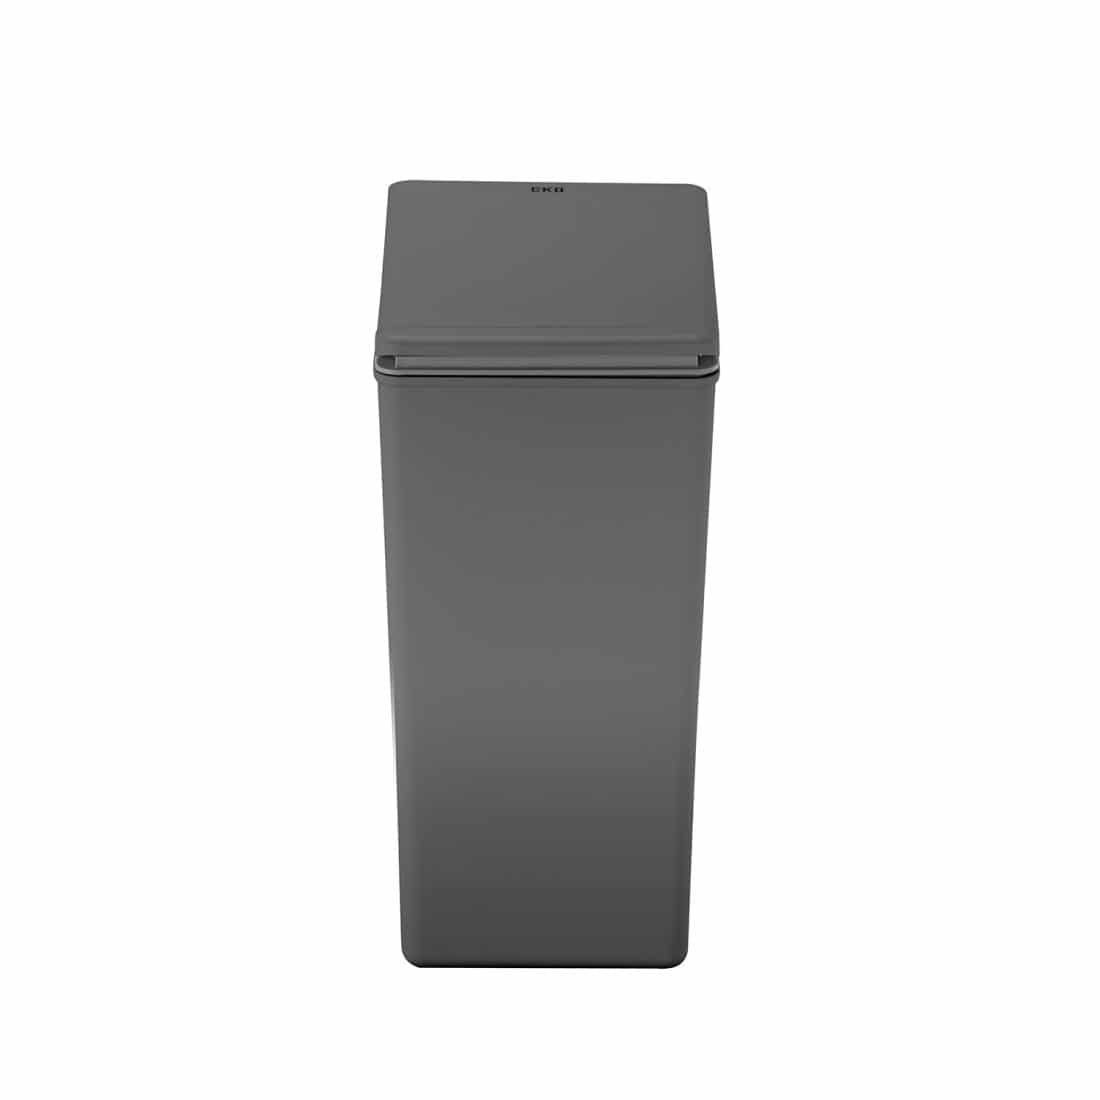 Morandi Touch Bin 20L Separate waste bin, connectable for recycling Grey